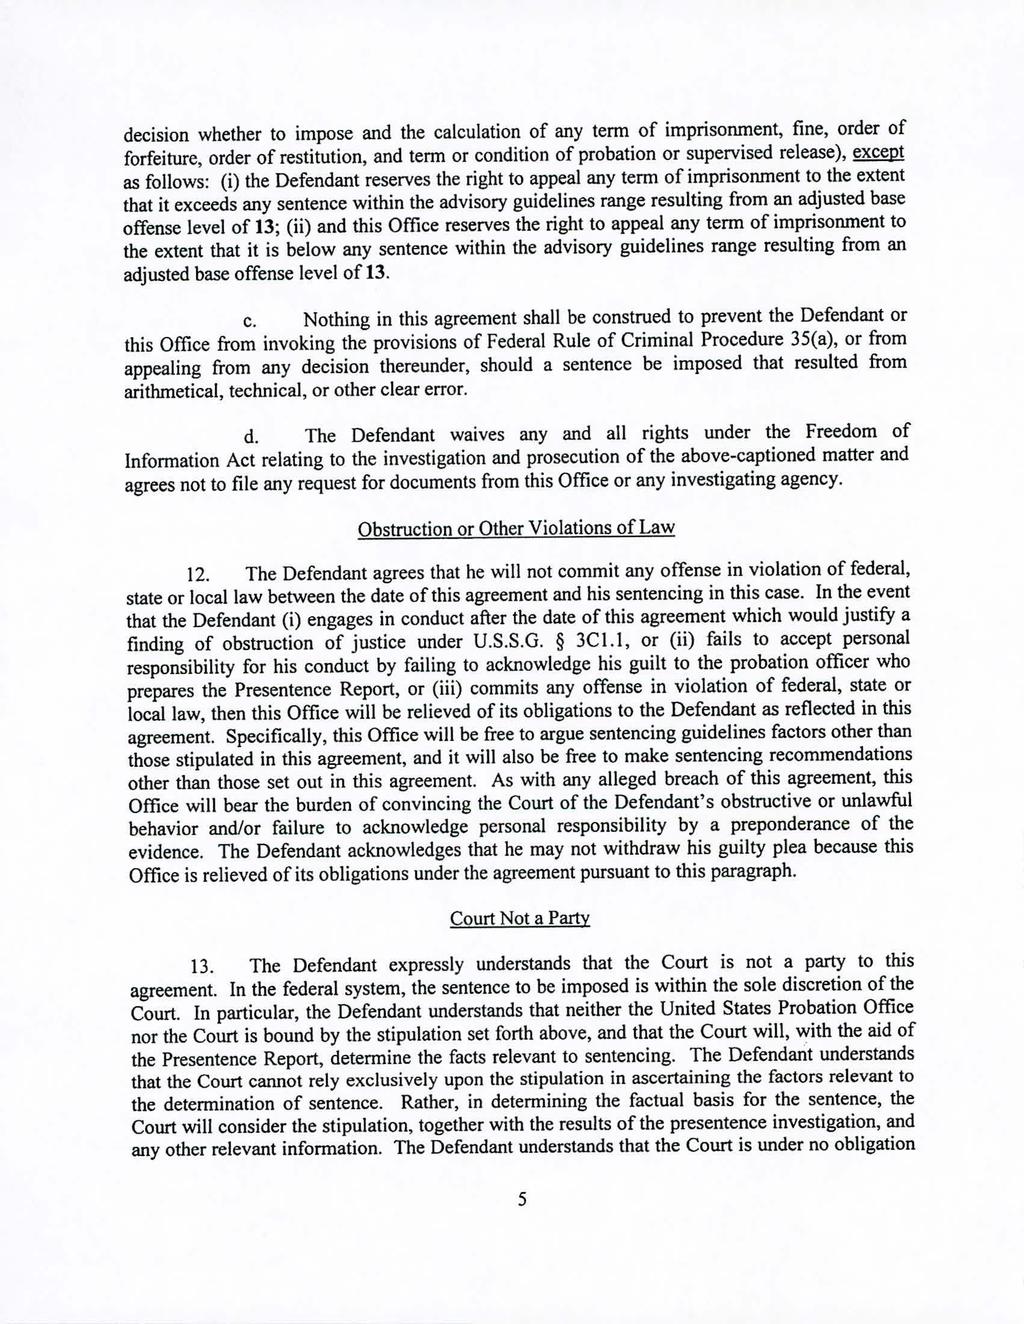 Case 8:16-cr-00023-WGC Document 5 Filed 02/01/16 Page 5 of 7 decision whether to impose and the calculation of any term of imprisonment, fine, order of forfeiture, order of restitution, and term or